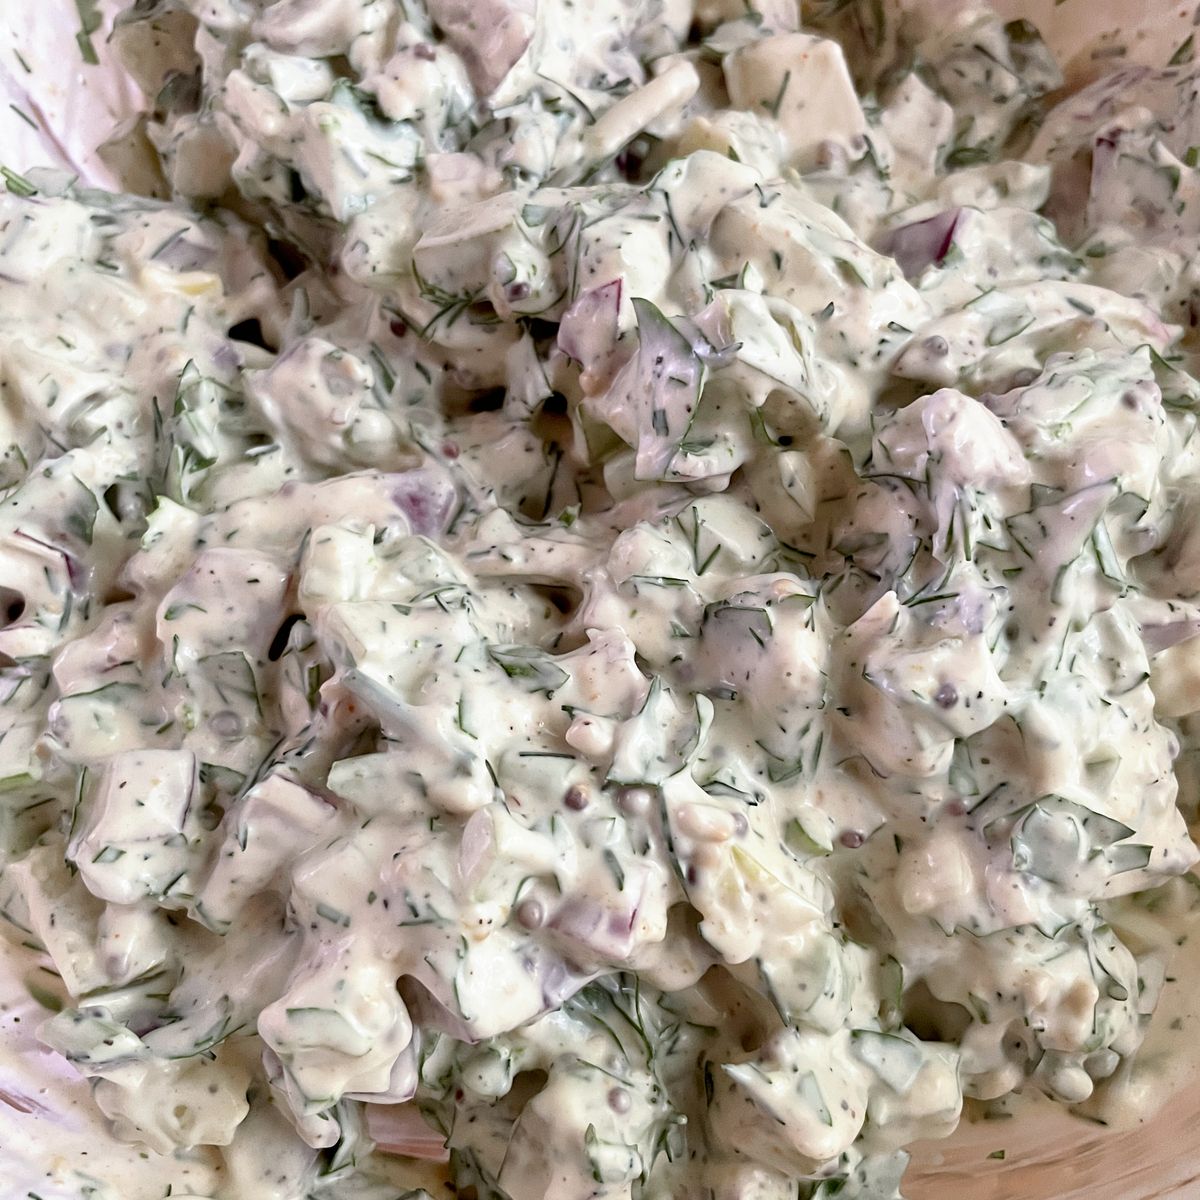 Best Herb Potato Salad - Light, Flavorful, and Crunchy